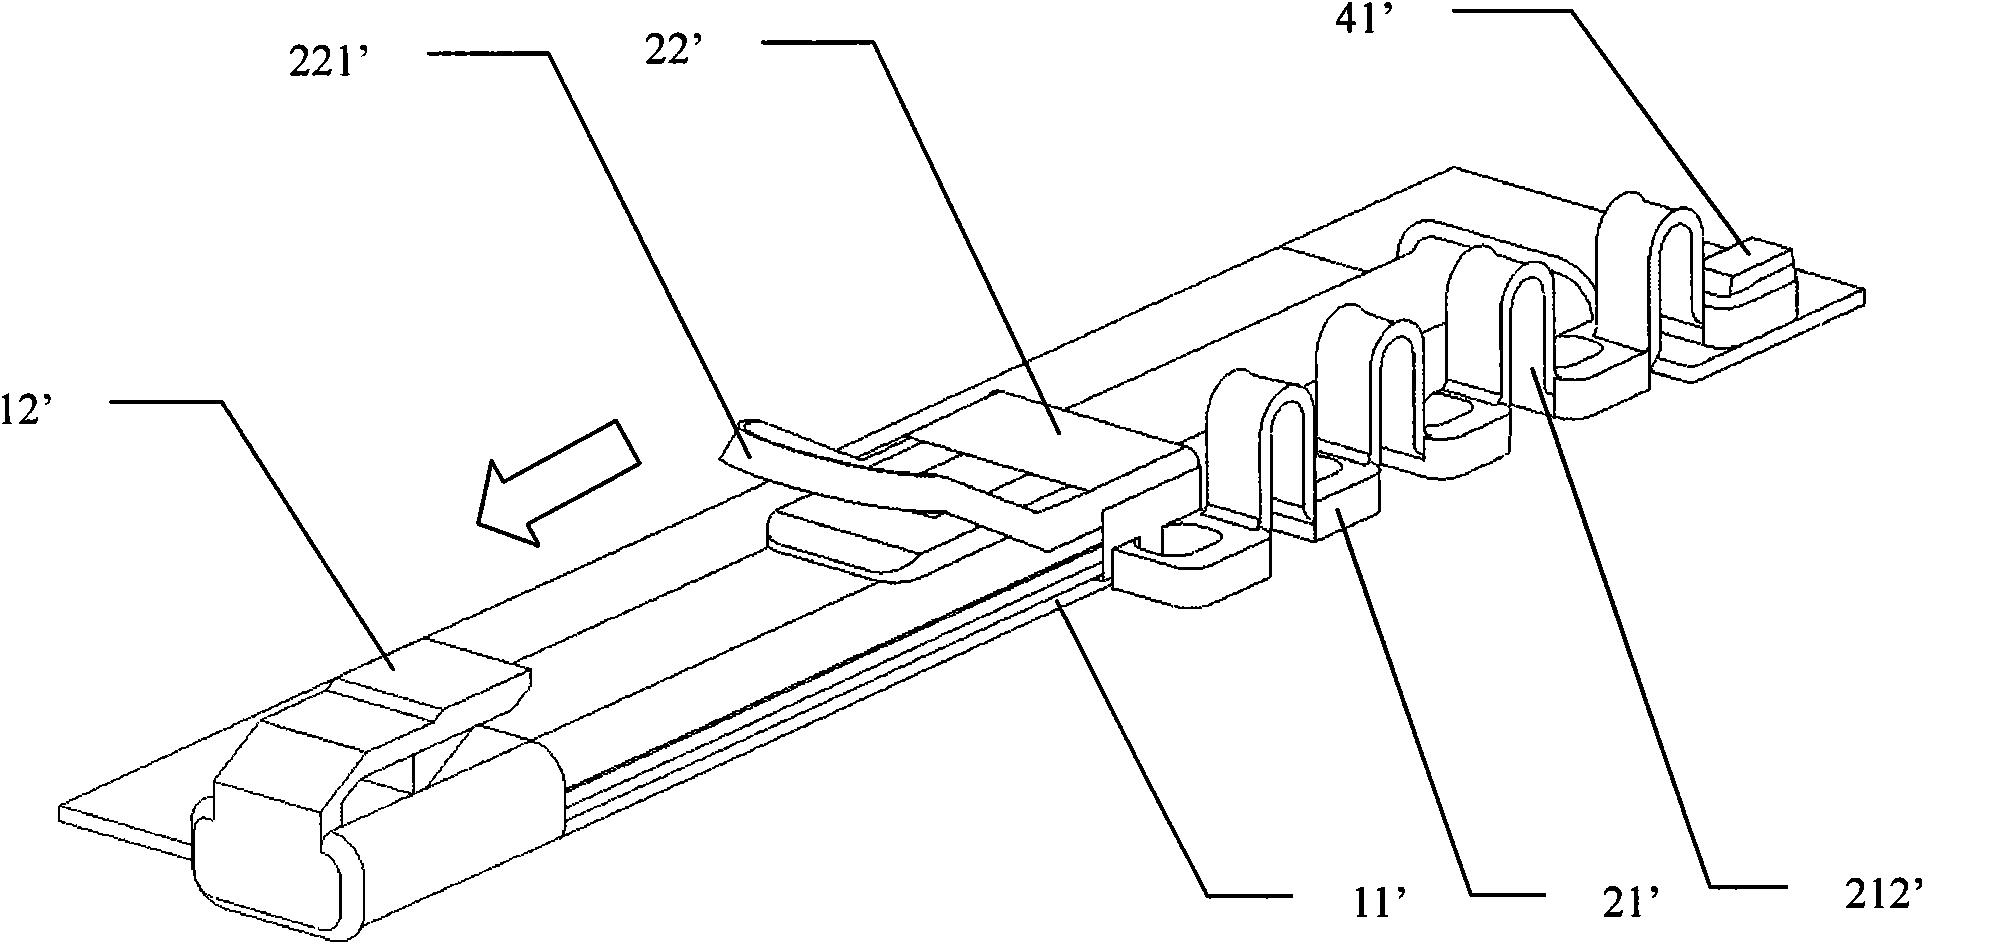 Device for penetrating and tying shoelace and capable of rapidly releasing shoelace